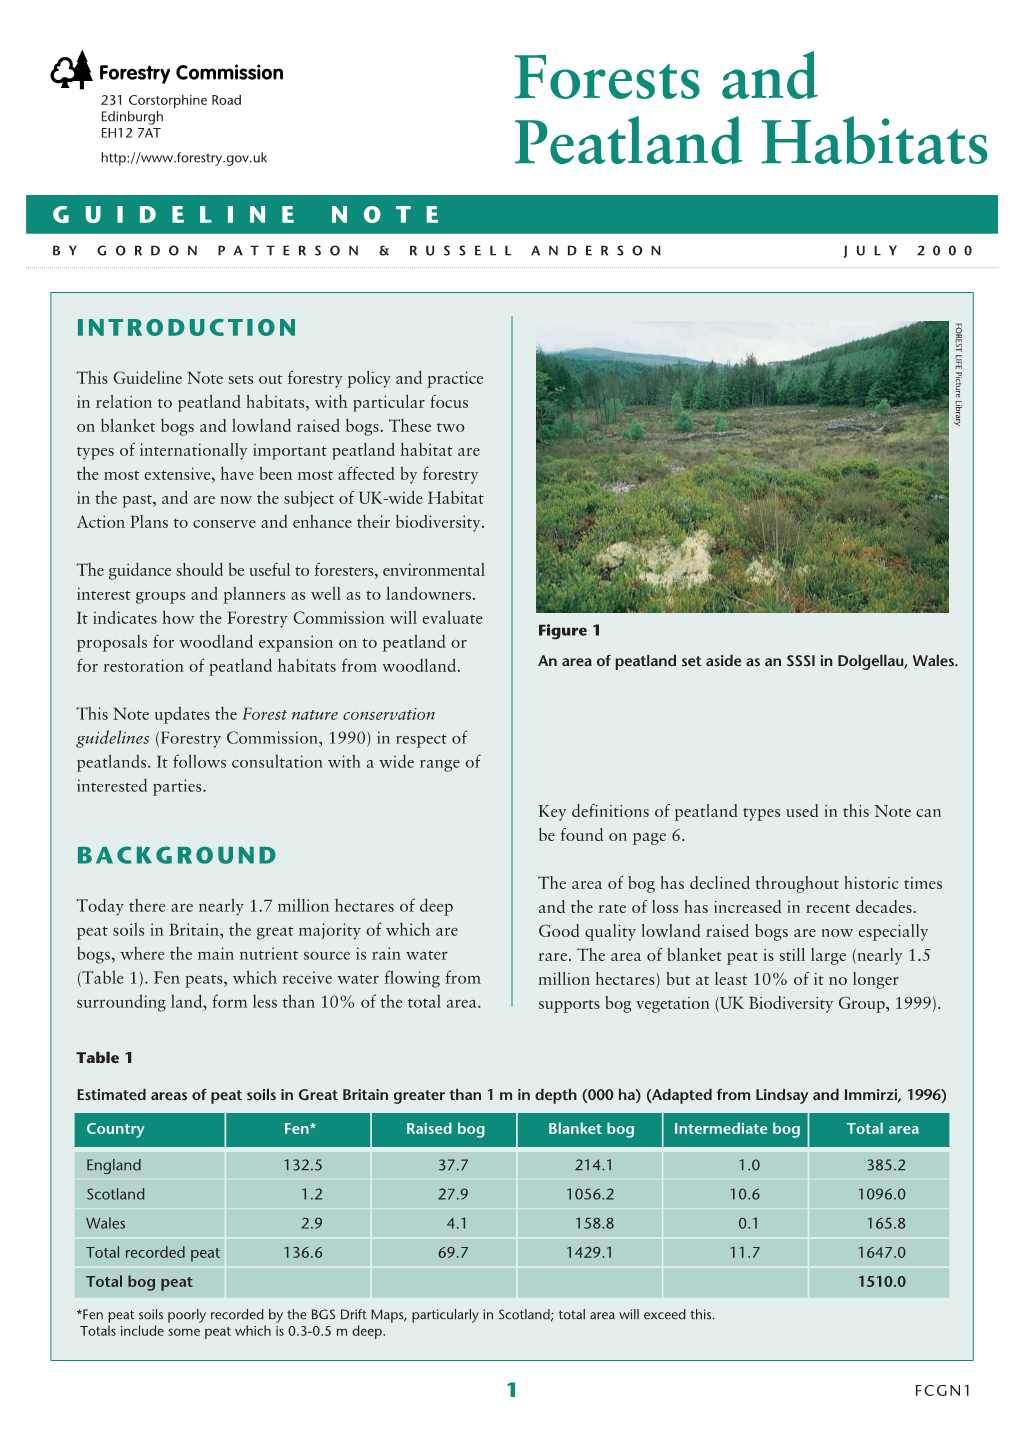 Forests and Peatland Habitats